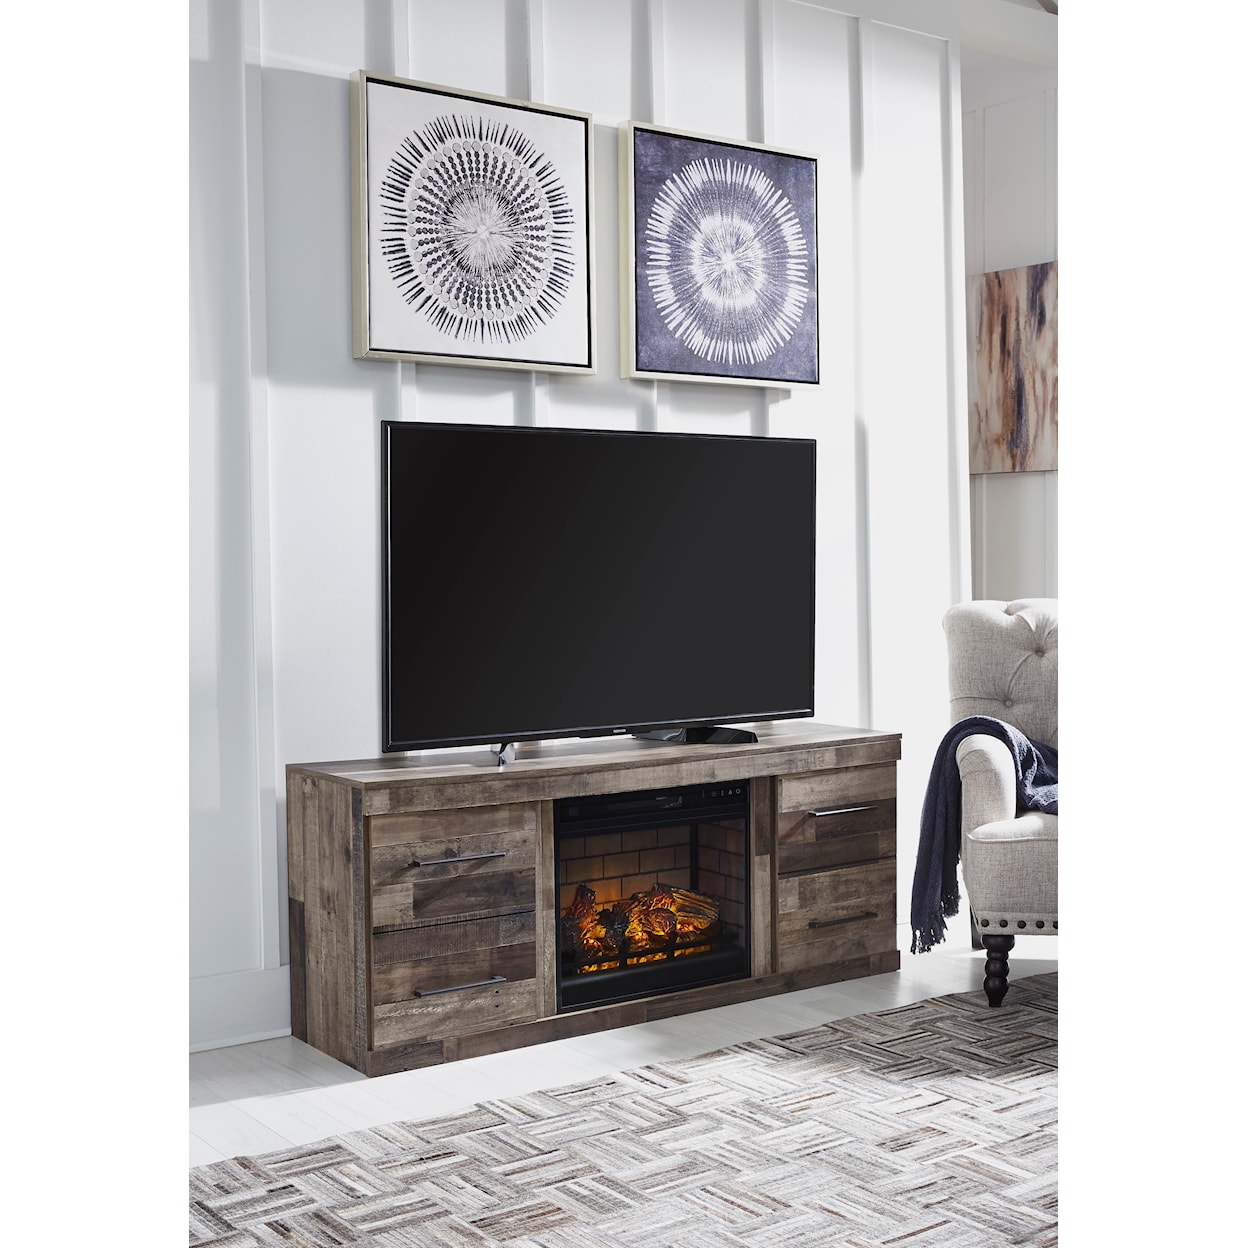 Signature Design Derekson 60" TV Stand with Electric Fireplace